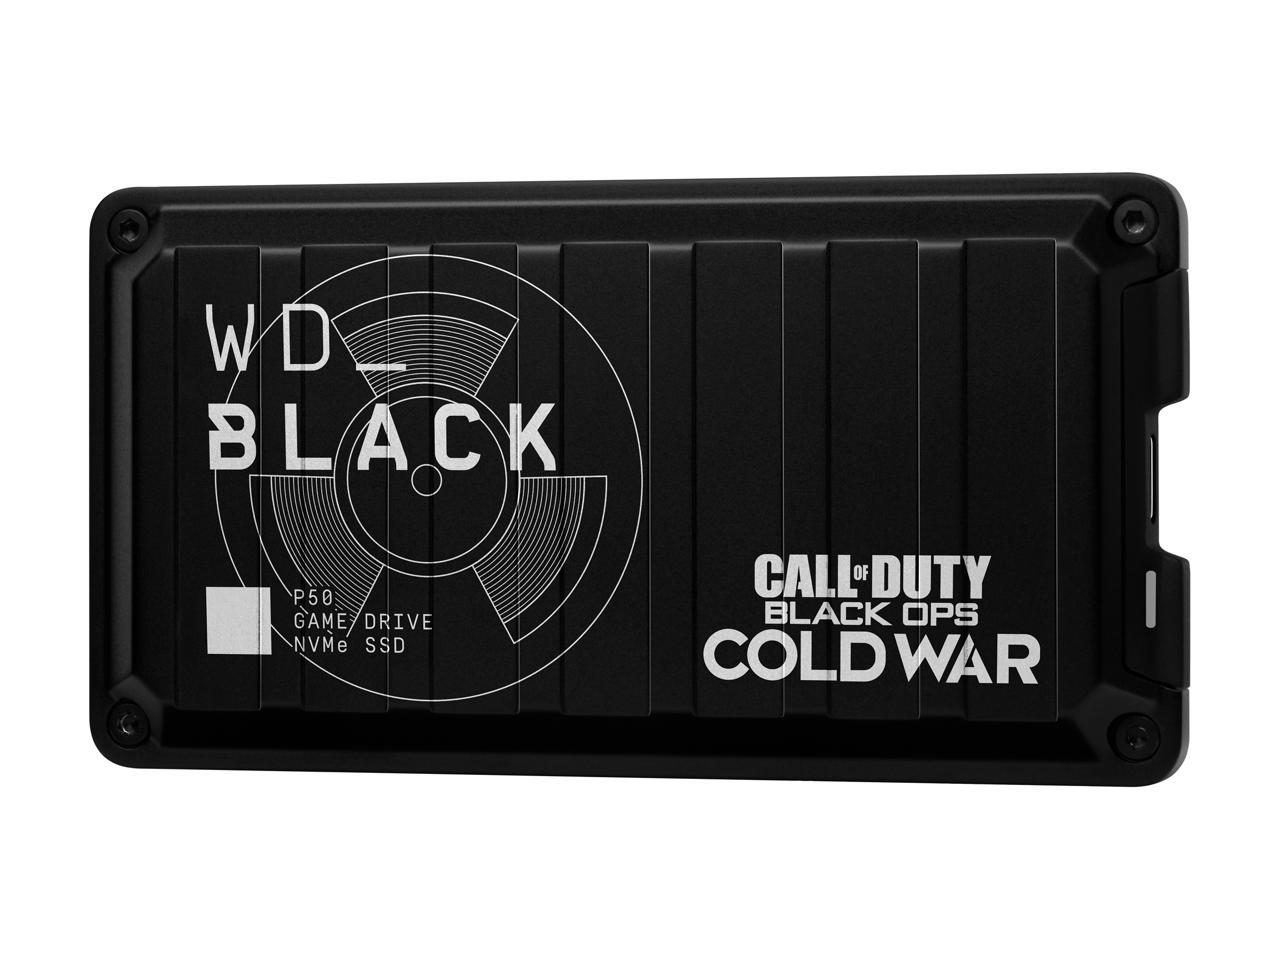 Wd Black 1tb P50 Portable Solid State Drive Call Of Duty Black Ops Cold War Special Edition Usb 3 2 Gen 2x2 Usb C Game Drive Nvme Ssd Wdbazx0010bbk Wesn Newegg Com